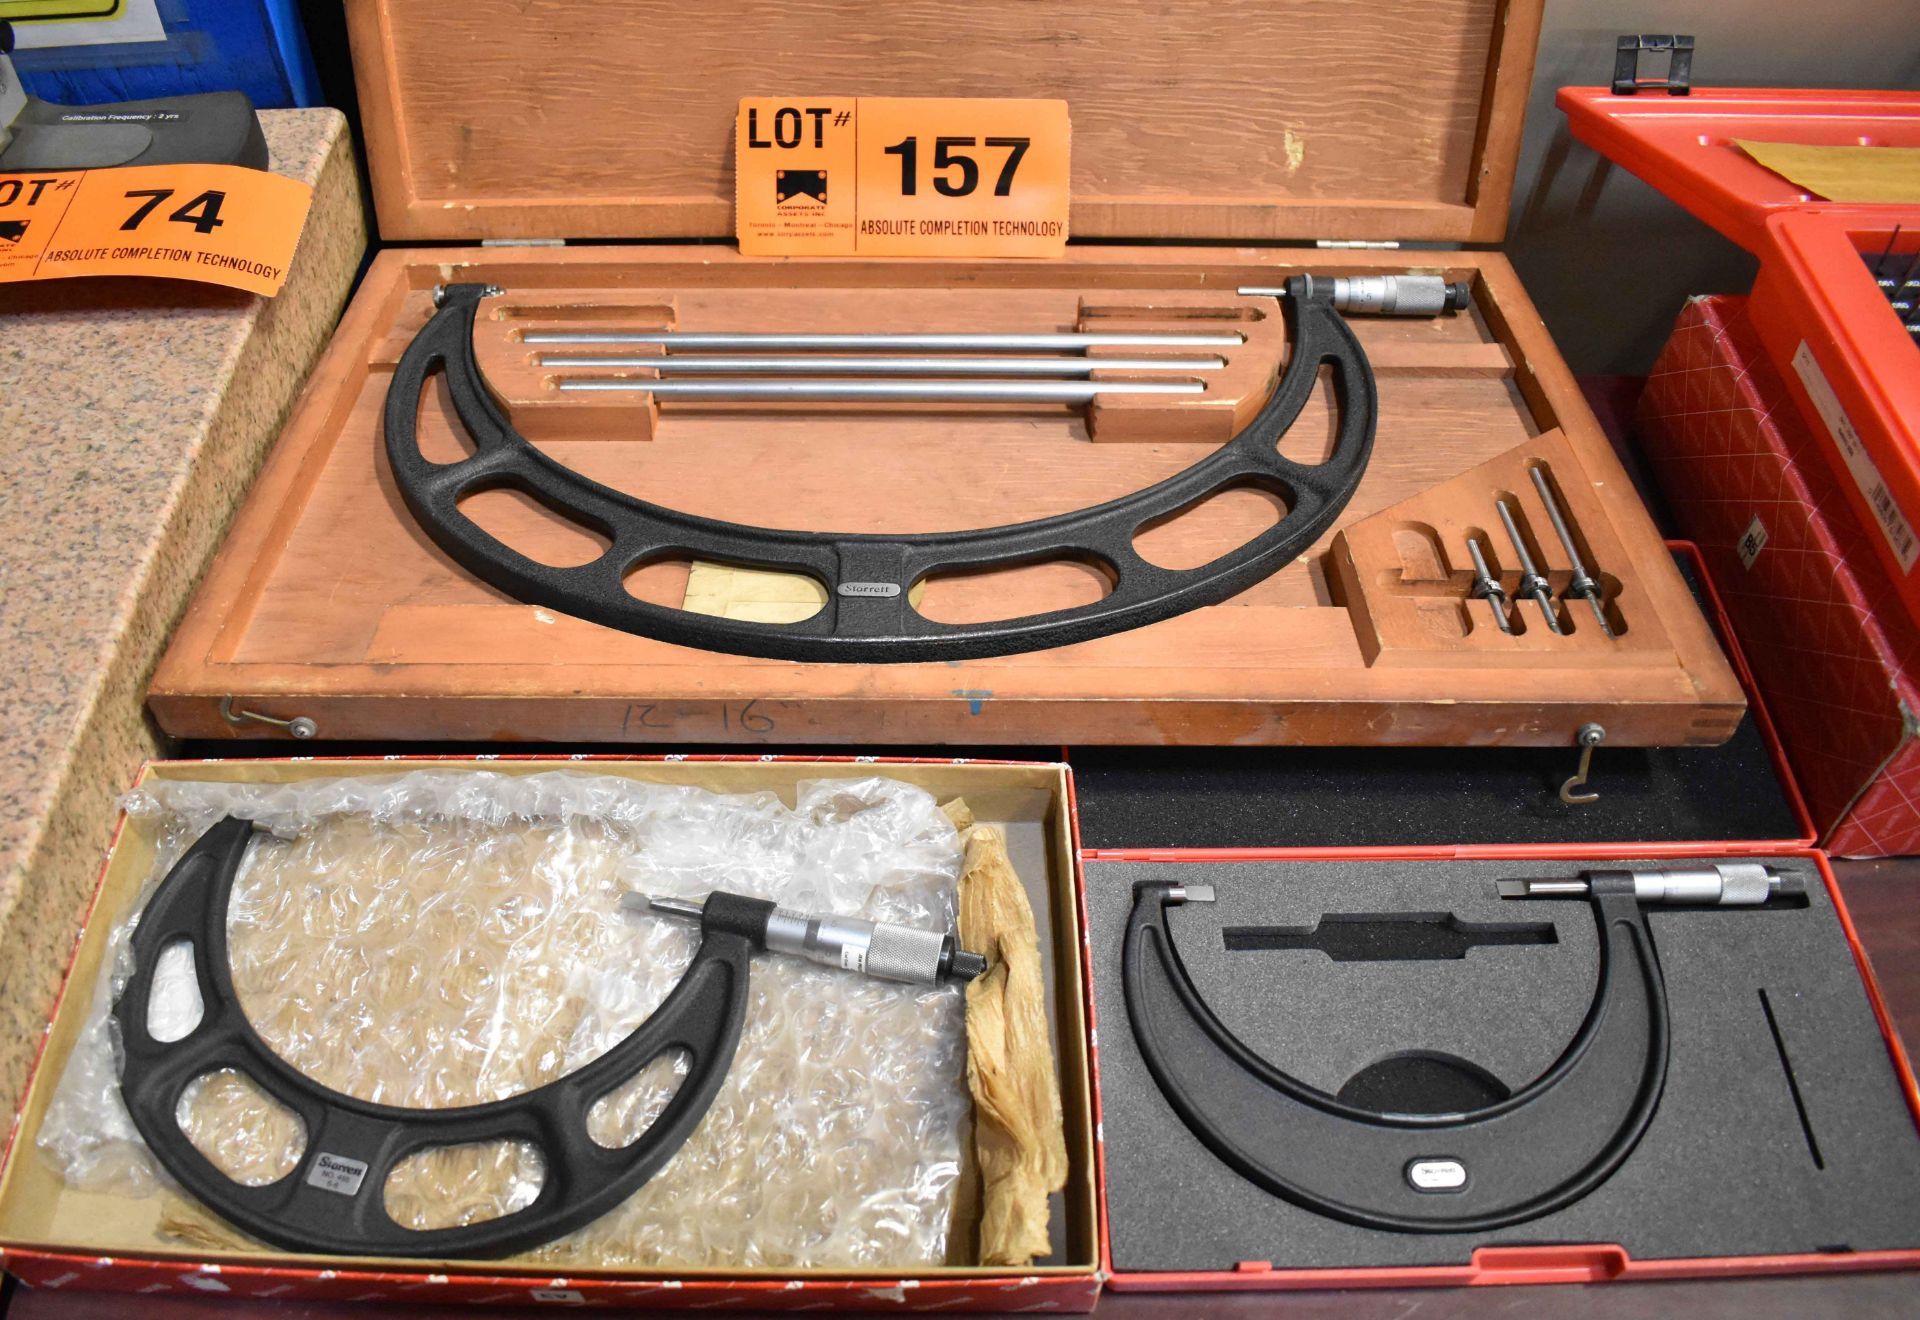 LOT/ STARRETT OUTSIDE MICROMETERS [RIGGING FEES FOR LOT #157 - $10 USD PLUS APPLICABLE TAXES]